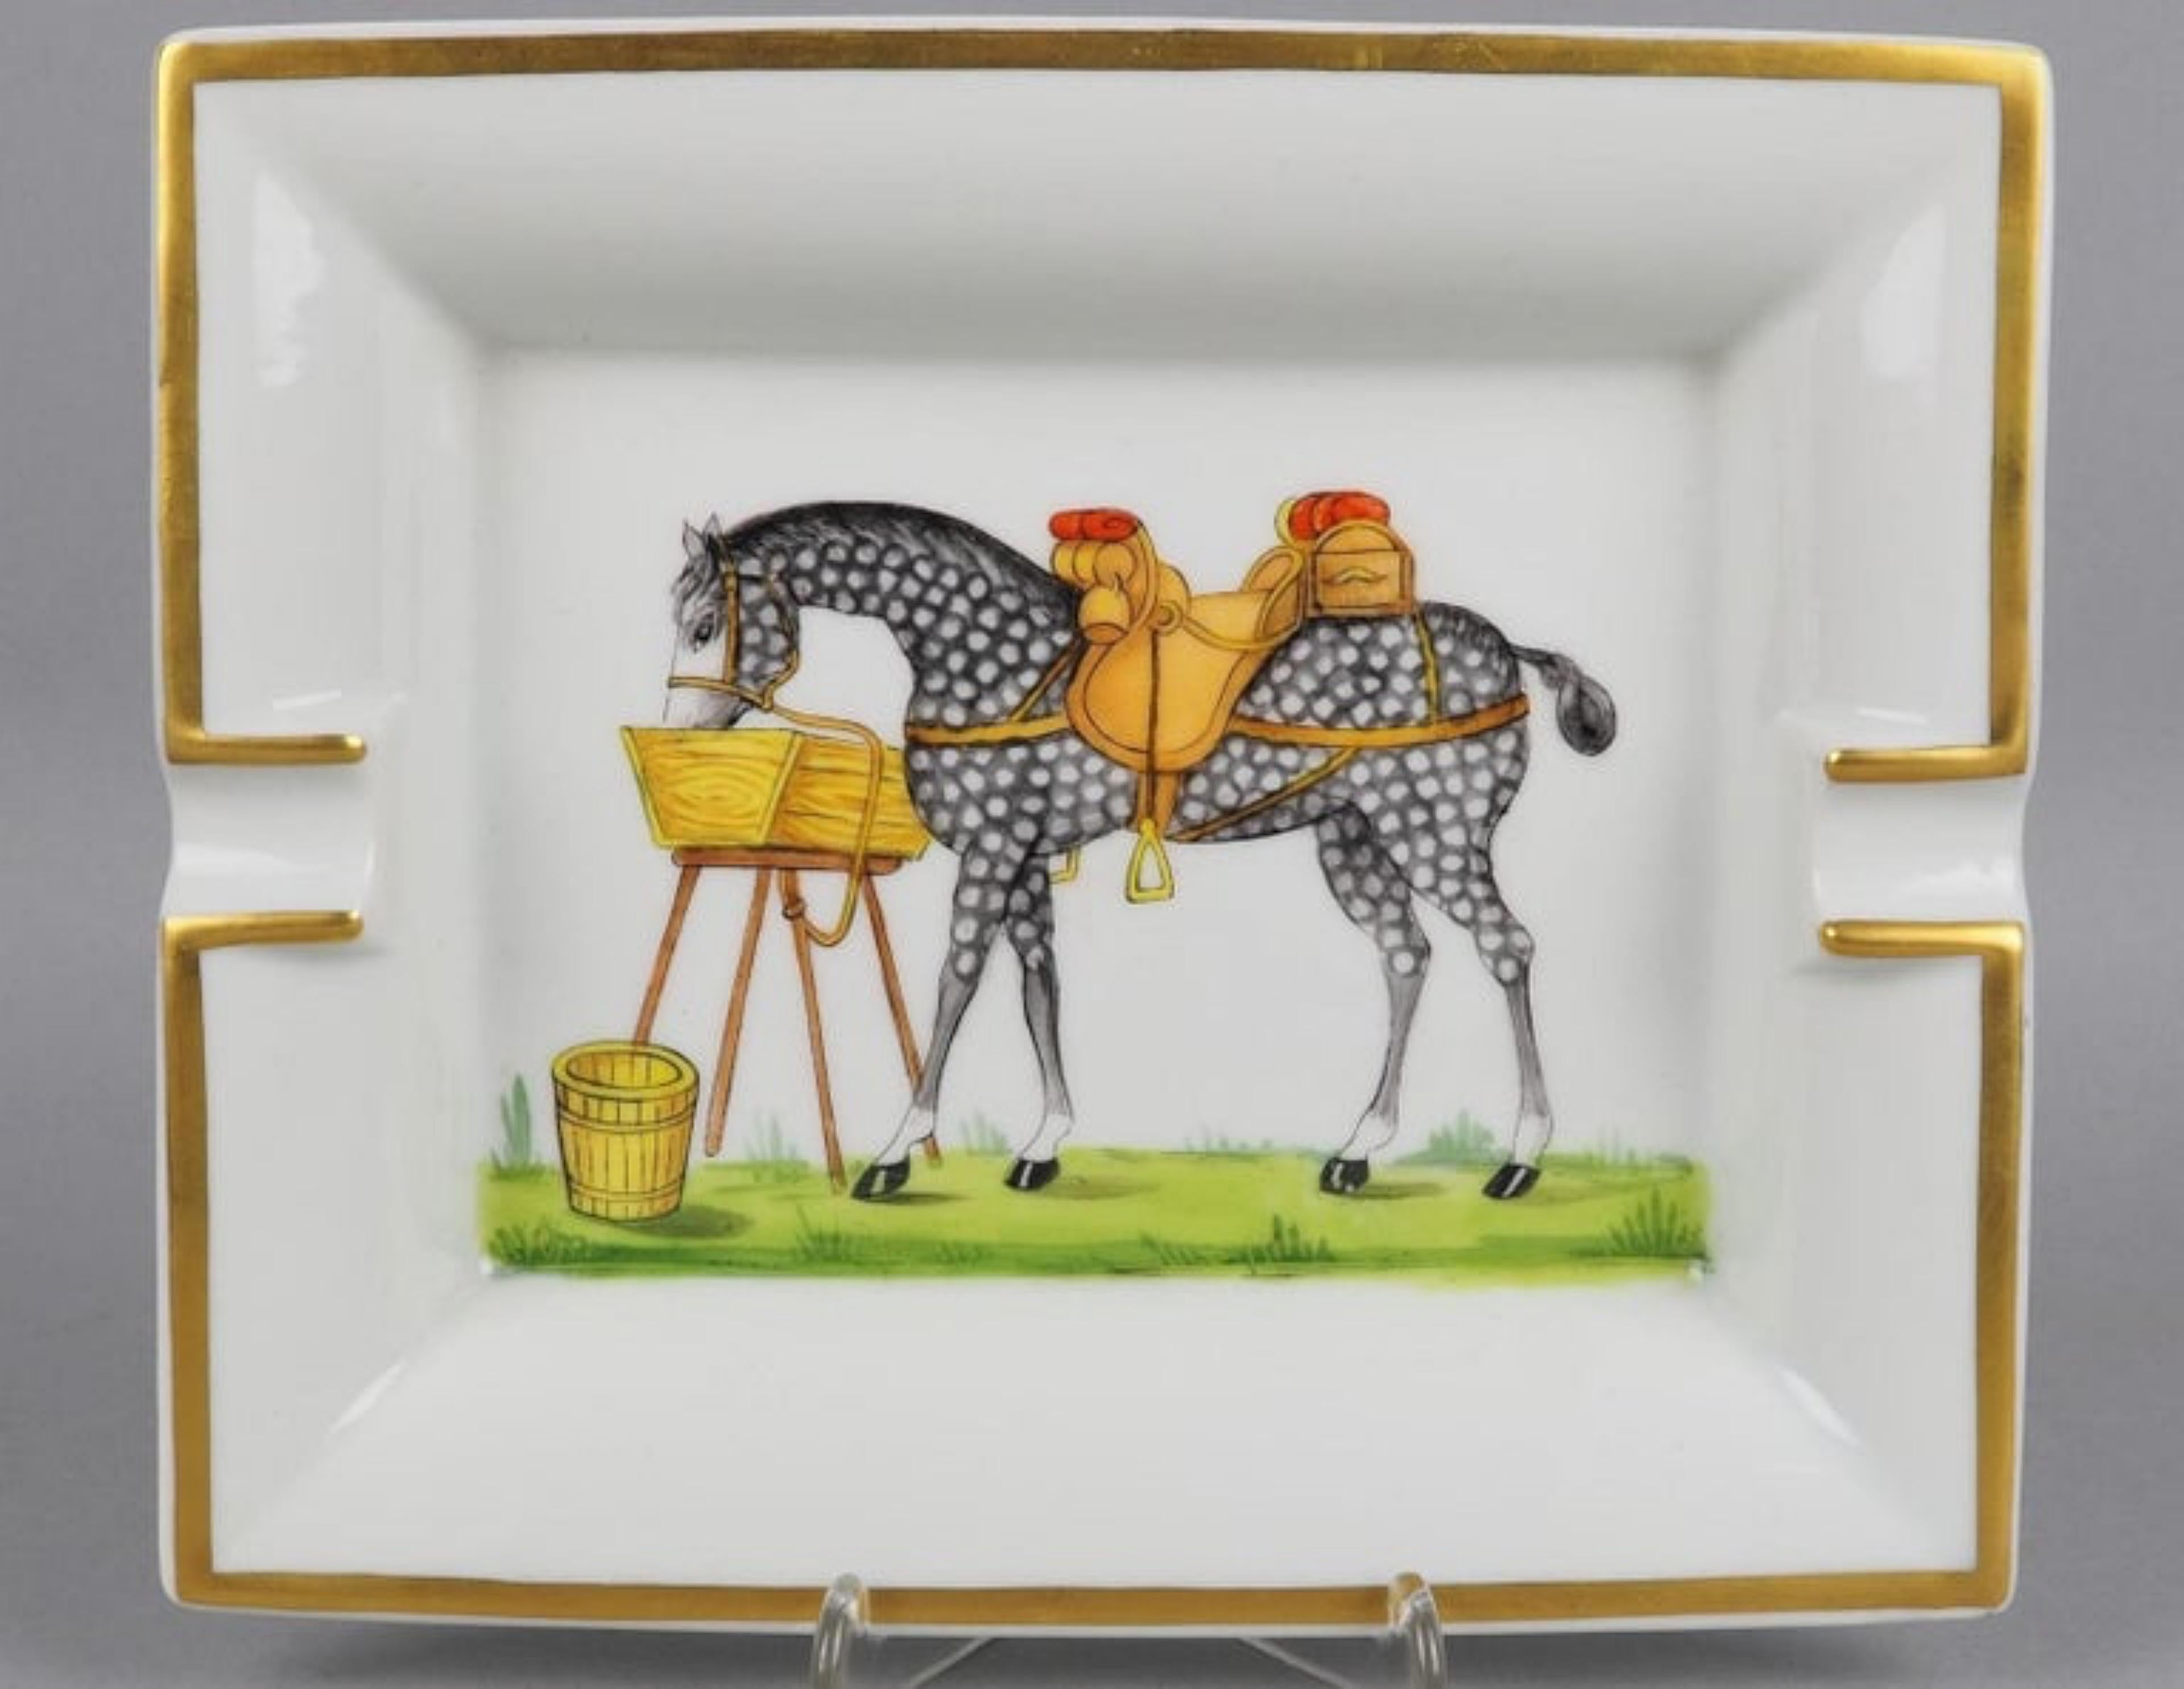 Hermés, ashtray, 2nd half of the 20th century.

Gray horse on a lining crib with gold rim. 
Underside covered with gray felt. 
Marked on the side: Hermés- Paris and Made in France, golden H stamped on the bottom. Measurements: approx. 3.5x19x16cm.